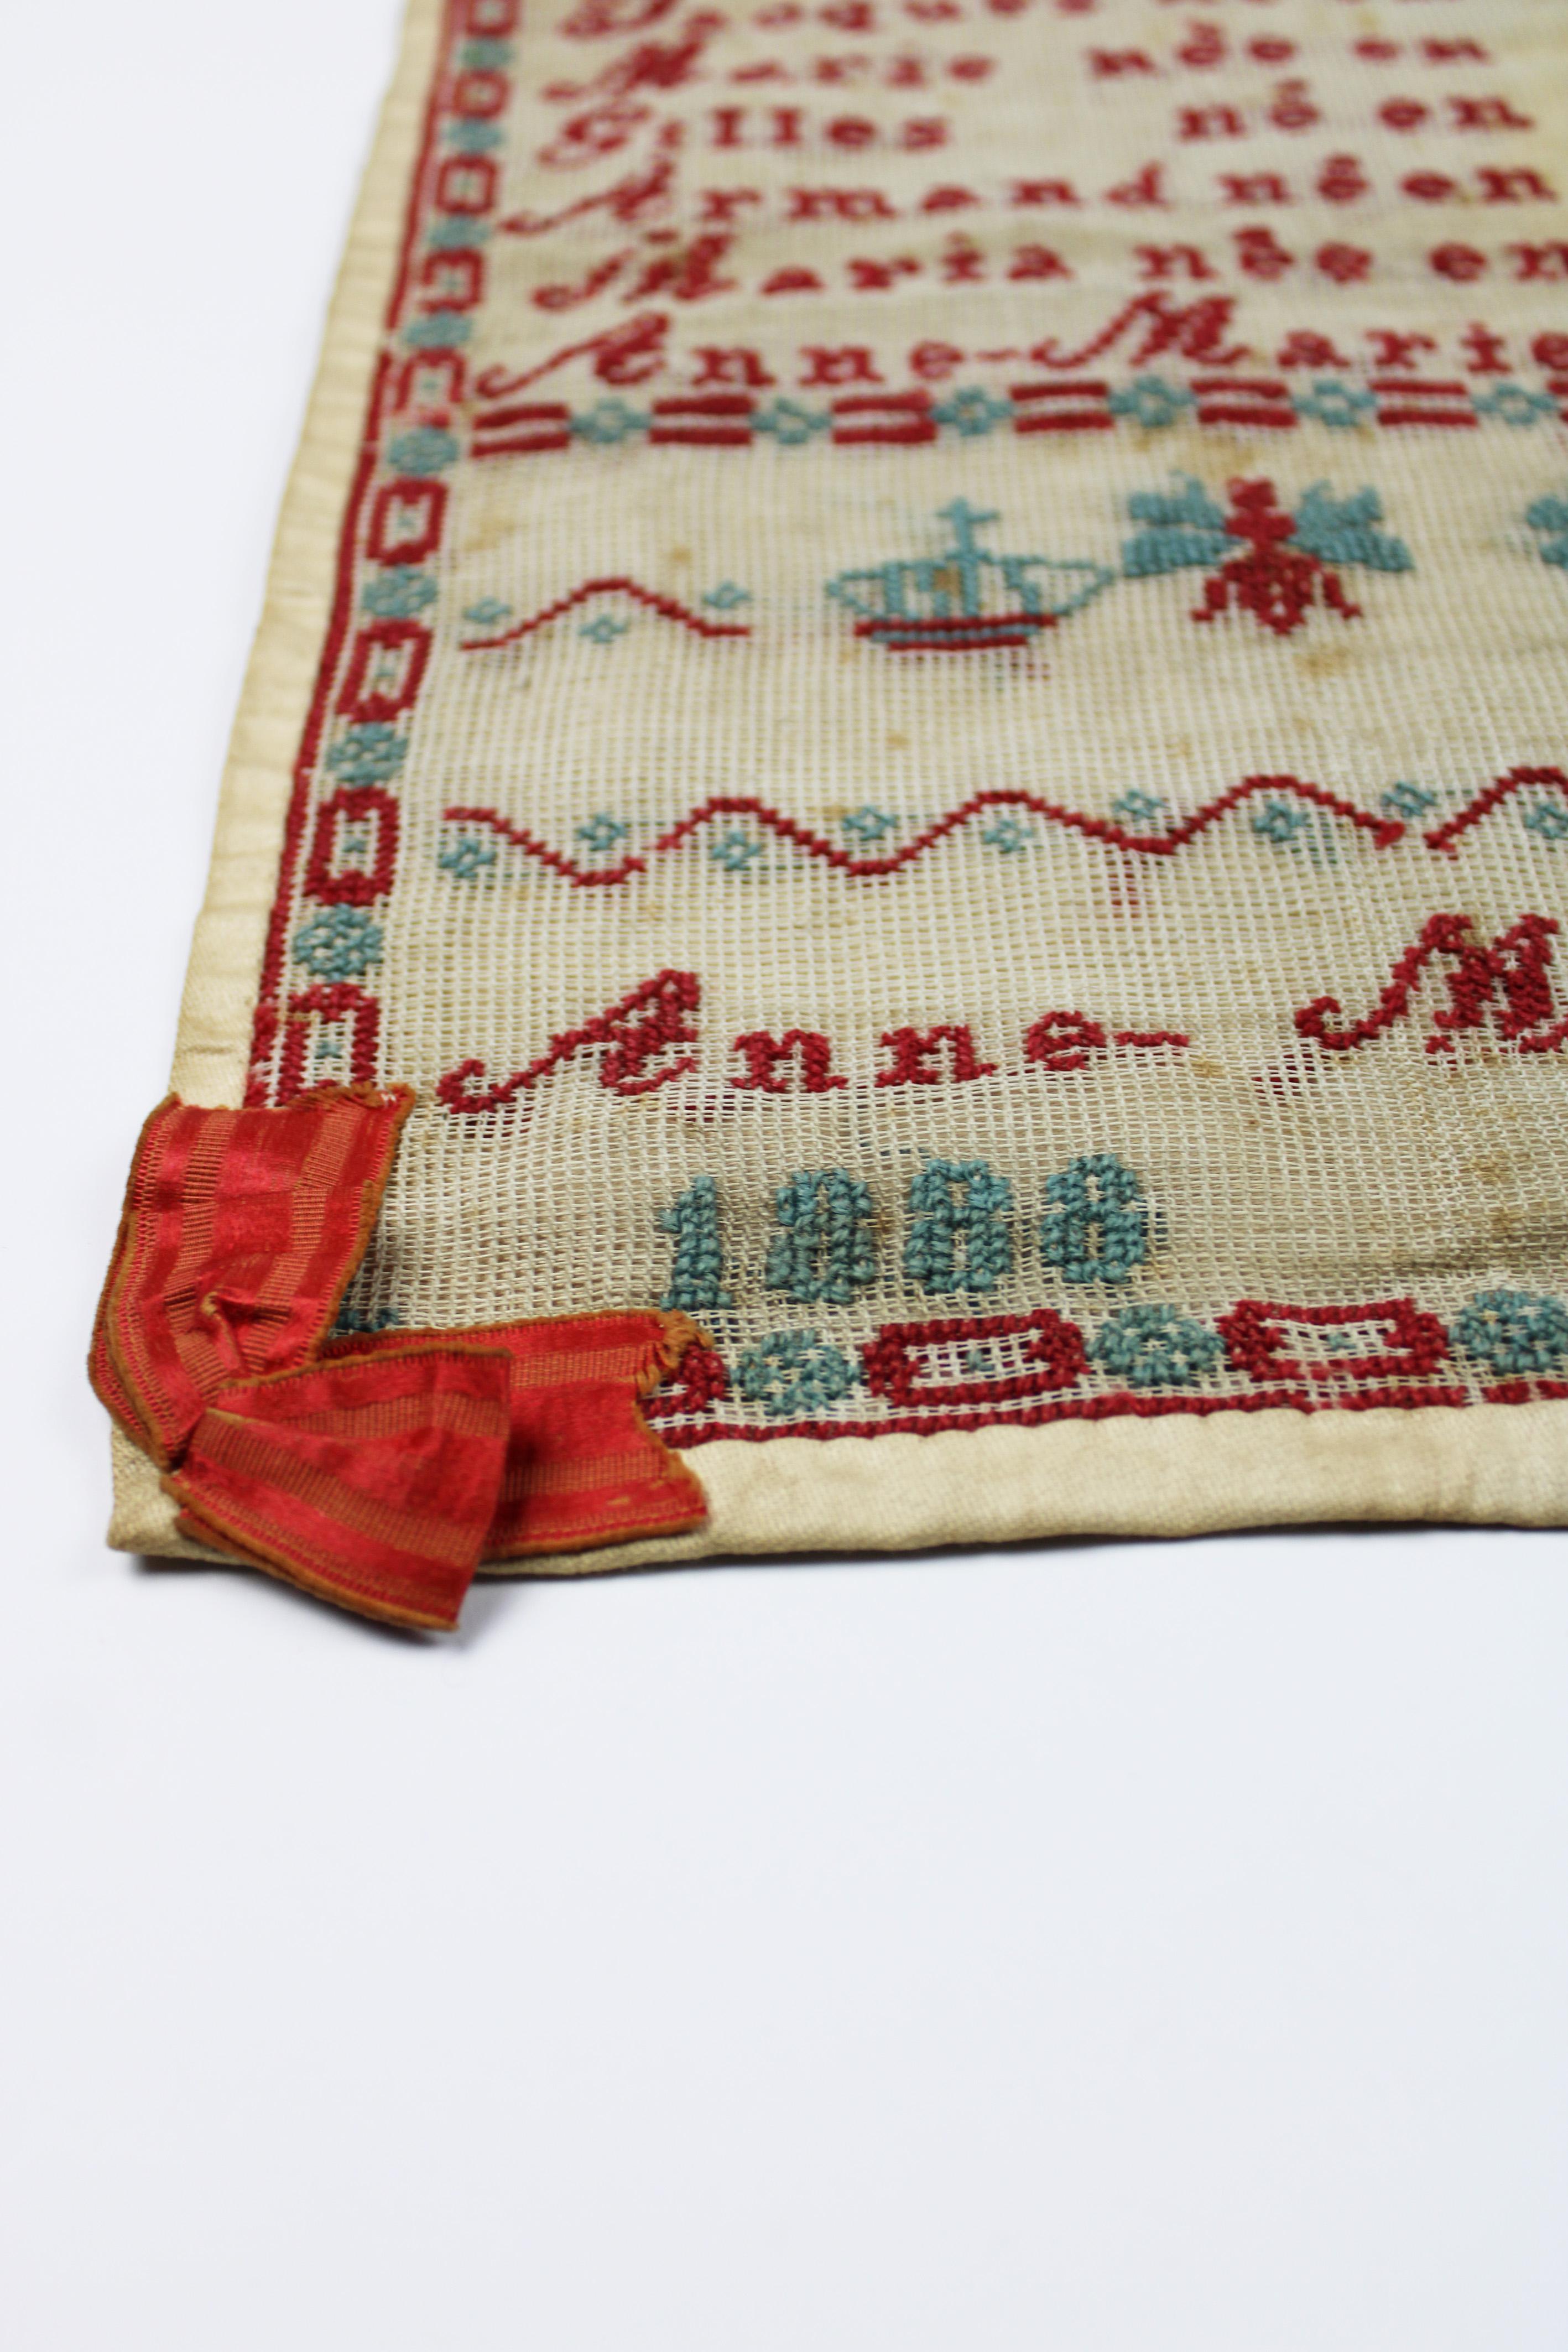 Embroidered 19th Century Sampler Off Family Tree 1888 by Anne Marie Frissen Belgium For Sale